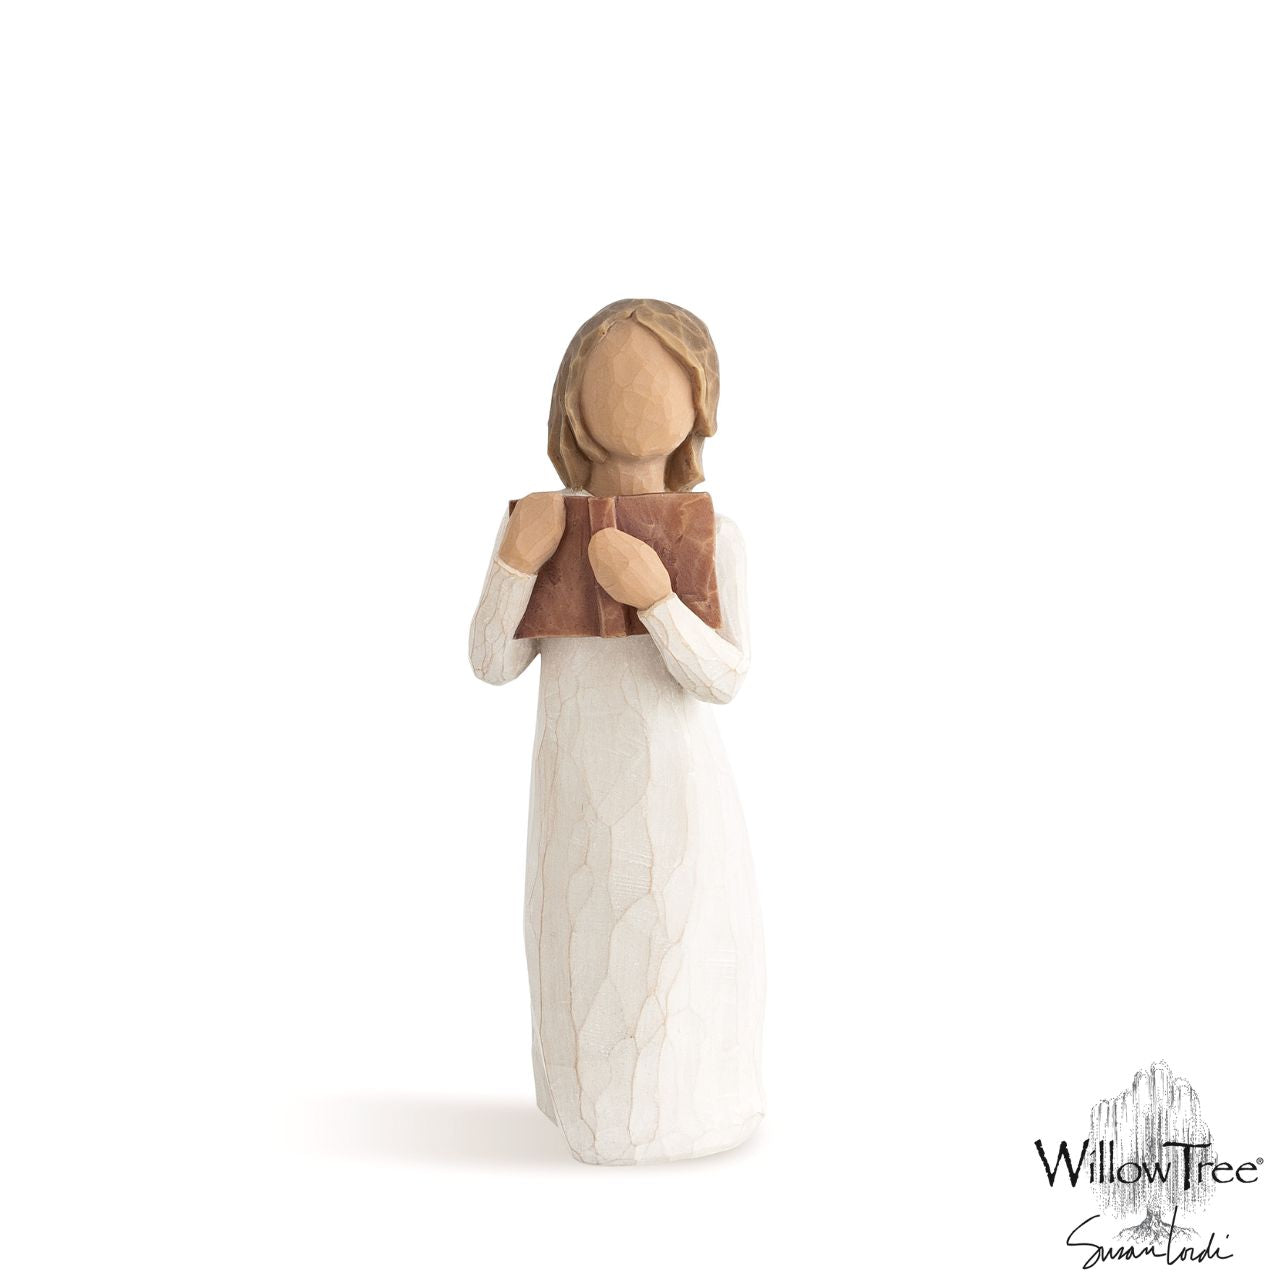 Love of Learning by Willow Tree  Willow Tree is an intimate line of figurative sculptures representing sentiments of love, closeness, healing, courage, hope...all the emotions we encounter in life. Artist Susan Lordi hand carves the original of each Willow Tree sculpture.